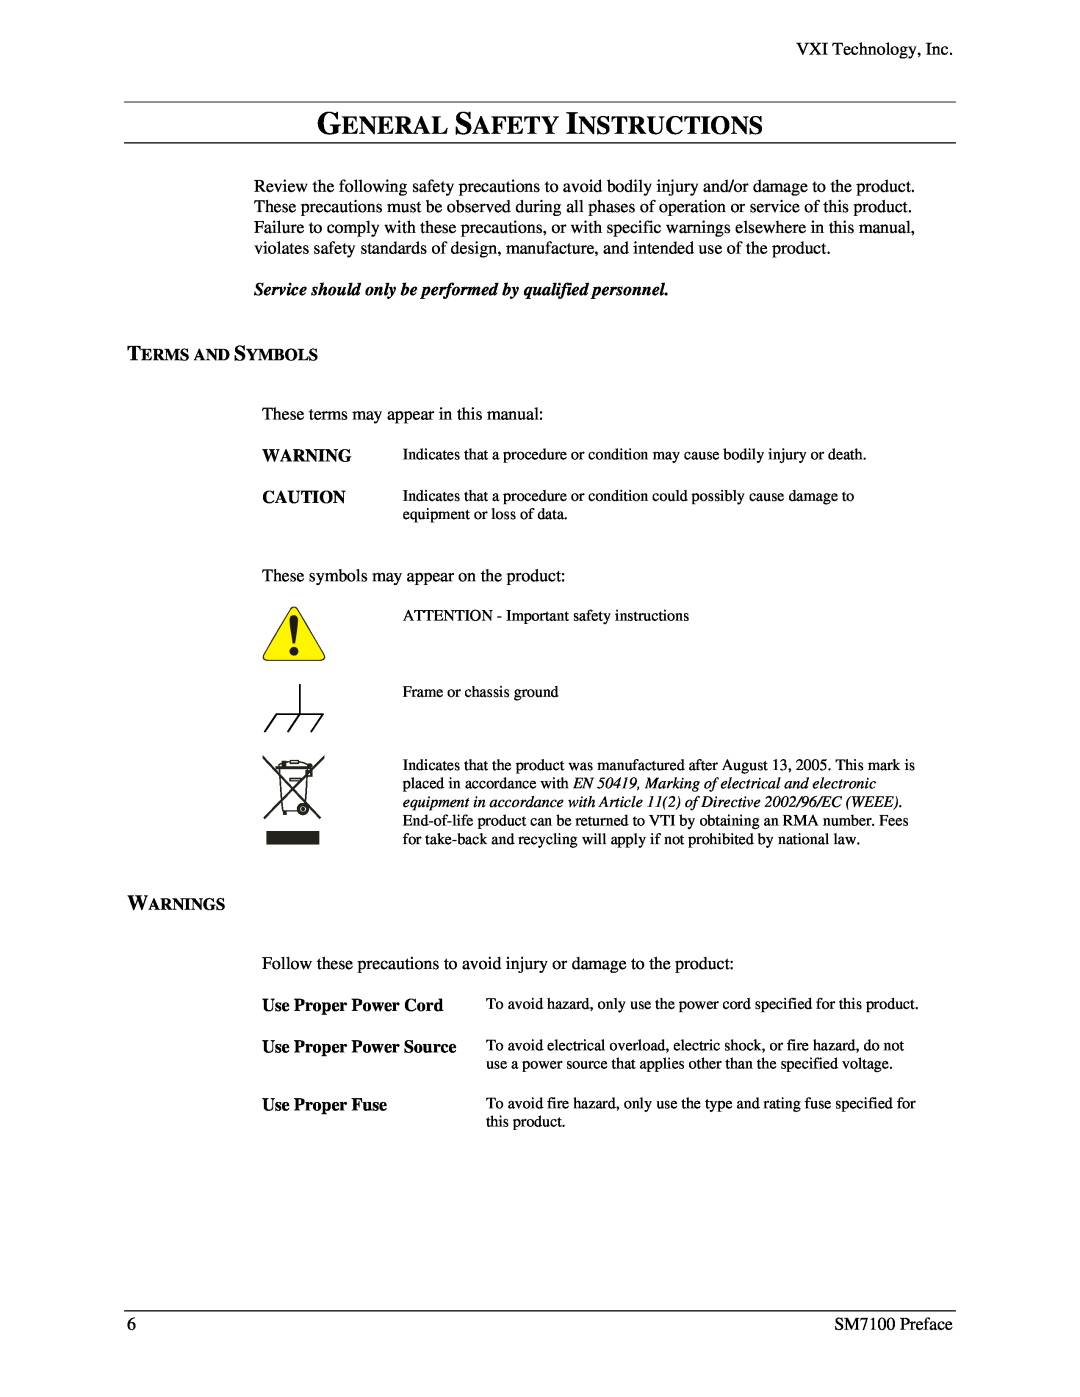 VXI Microwave Matrix General Safety Instructions, Terms And Symbols, Warnings, Use Proper Power Cord, Use Proper Fuse 